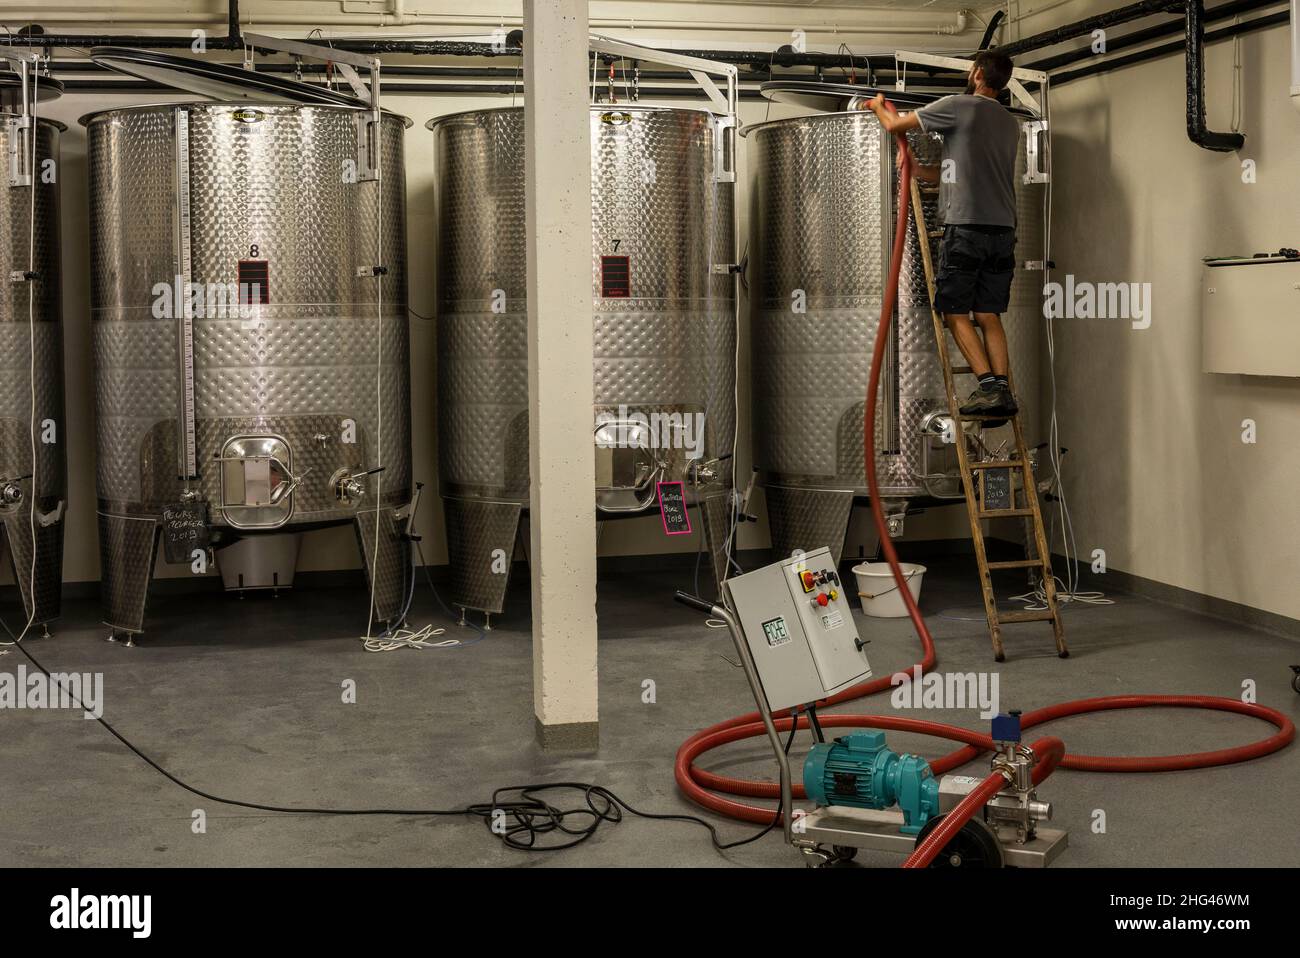 Monthelie, France - June 30, 2020: Man working at stainless steel wine barrels in the winery Les Hauts Bins in Monthelie in burgundy, France. Stock Photo